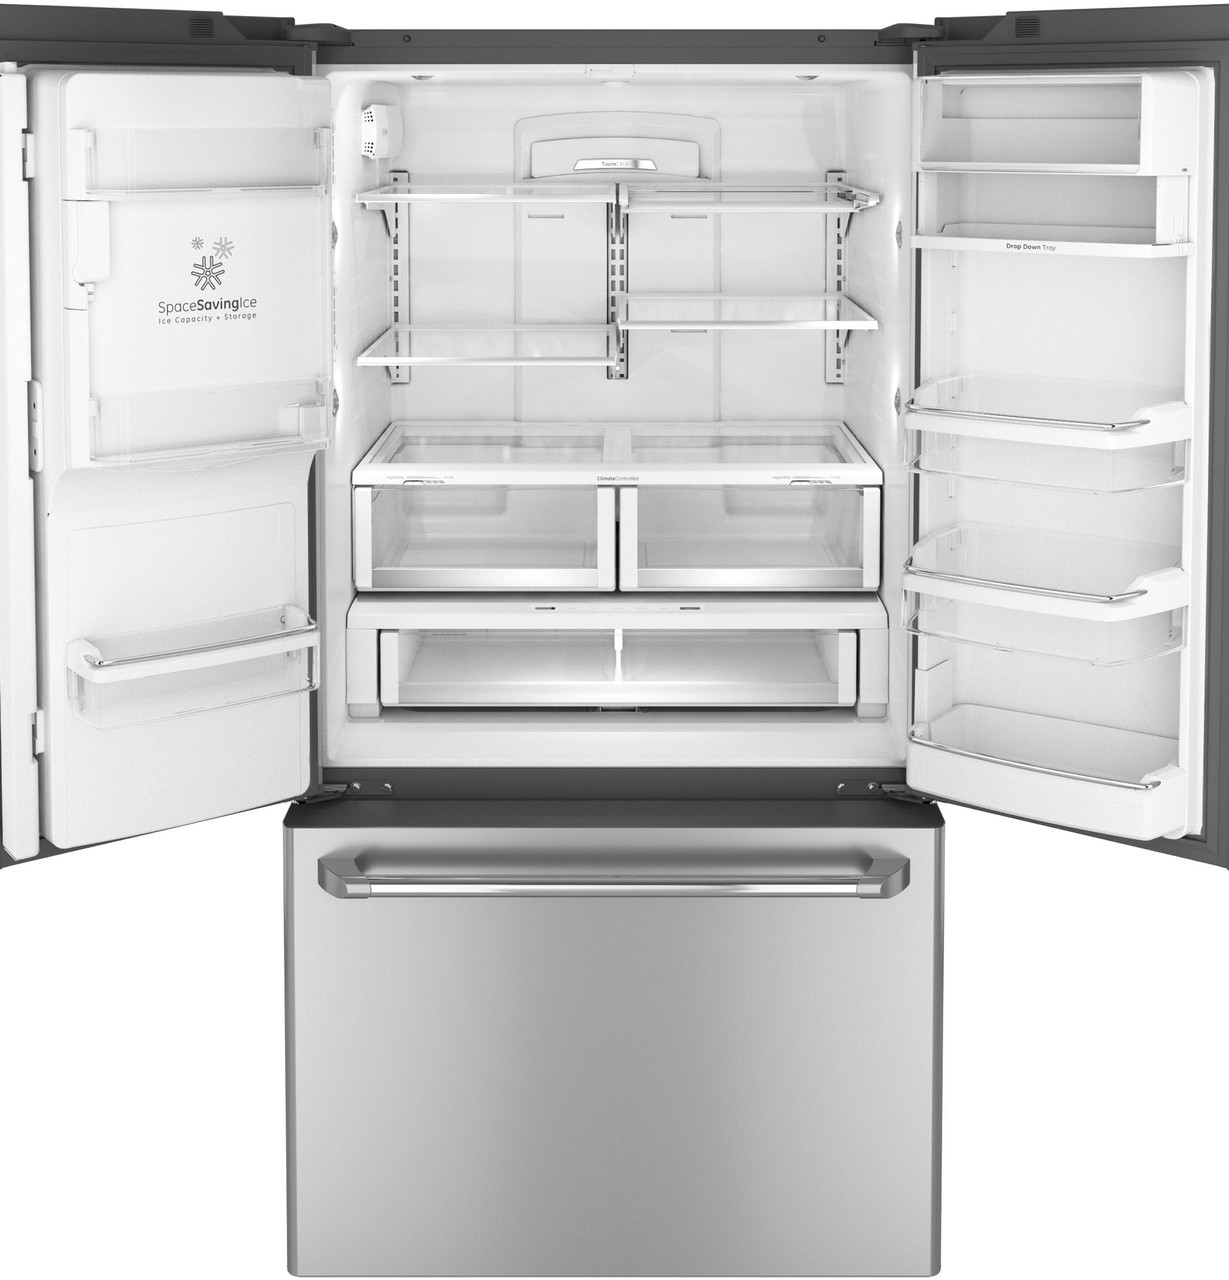 My Honest Review on the New Luxury GE Café Appliances Refrigerator - Color  & Chic